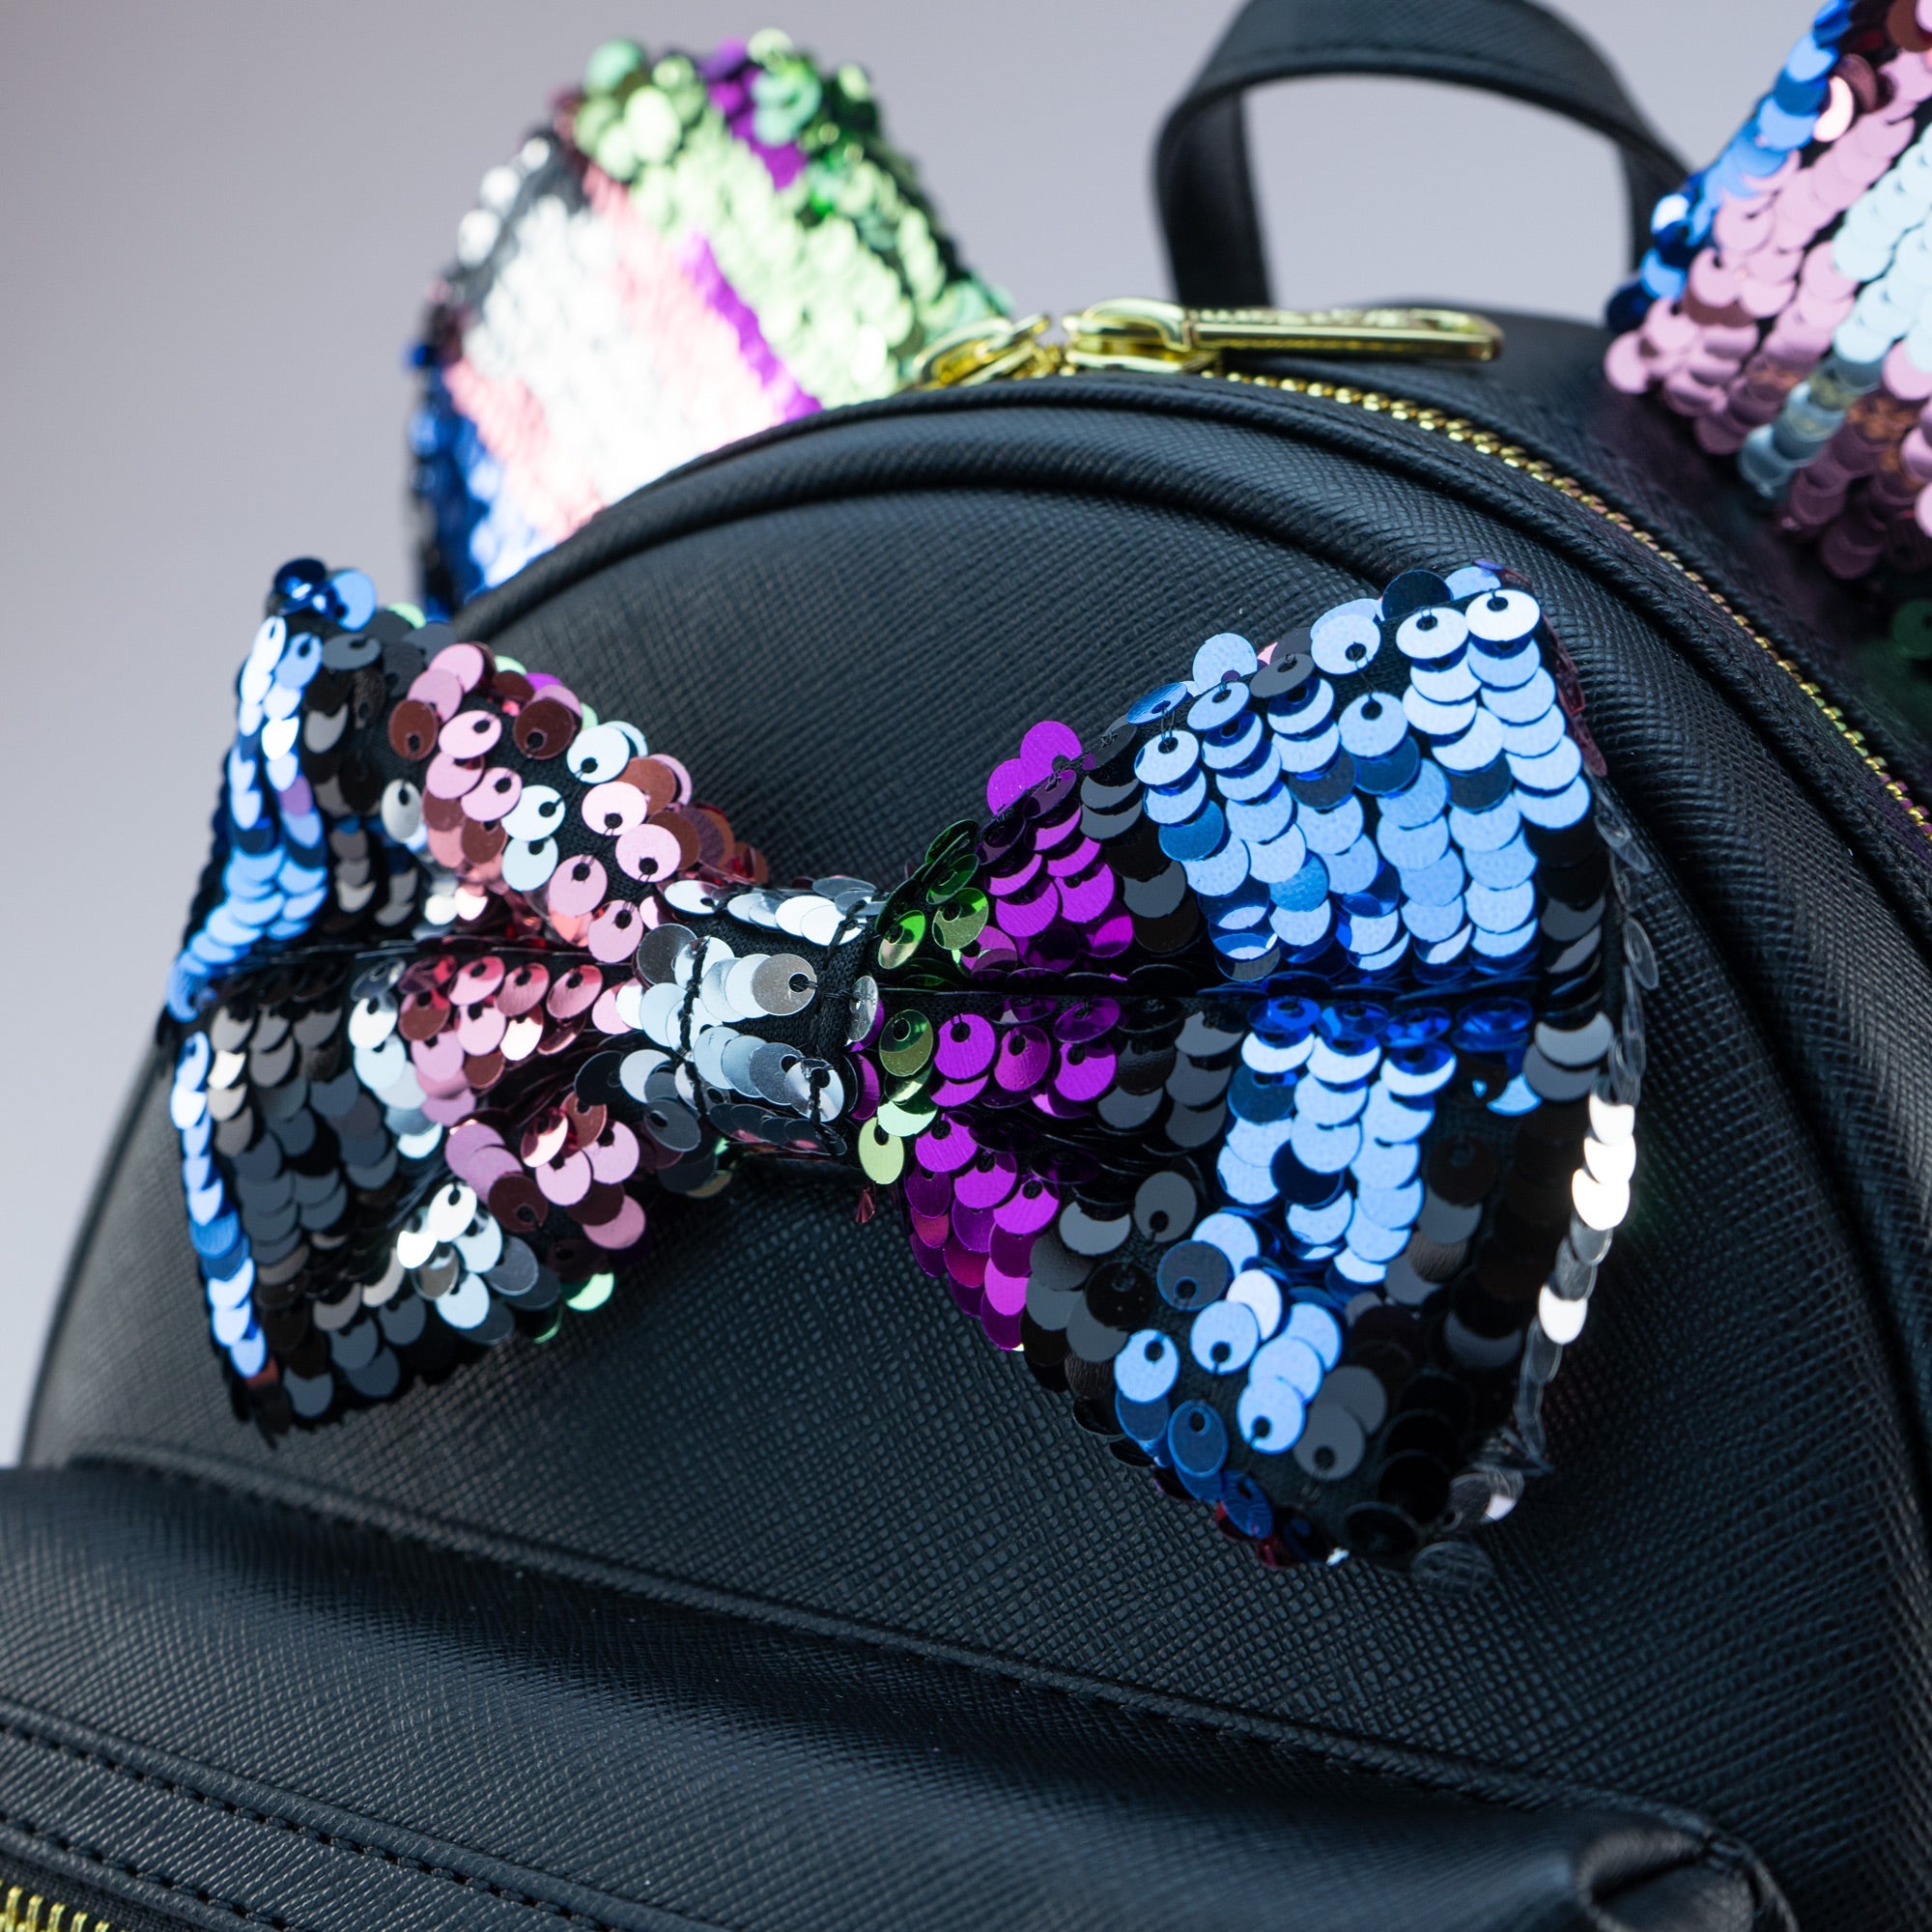 Loungefly x Disney Minnie Mouse Black Sequin Mini Backpack - GeekCore